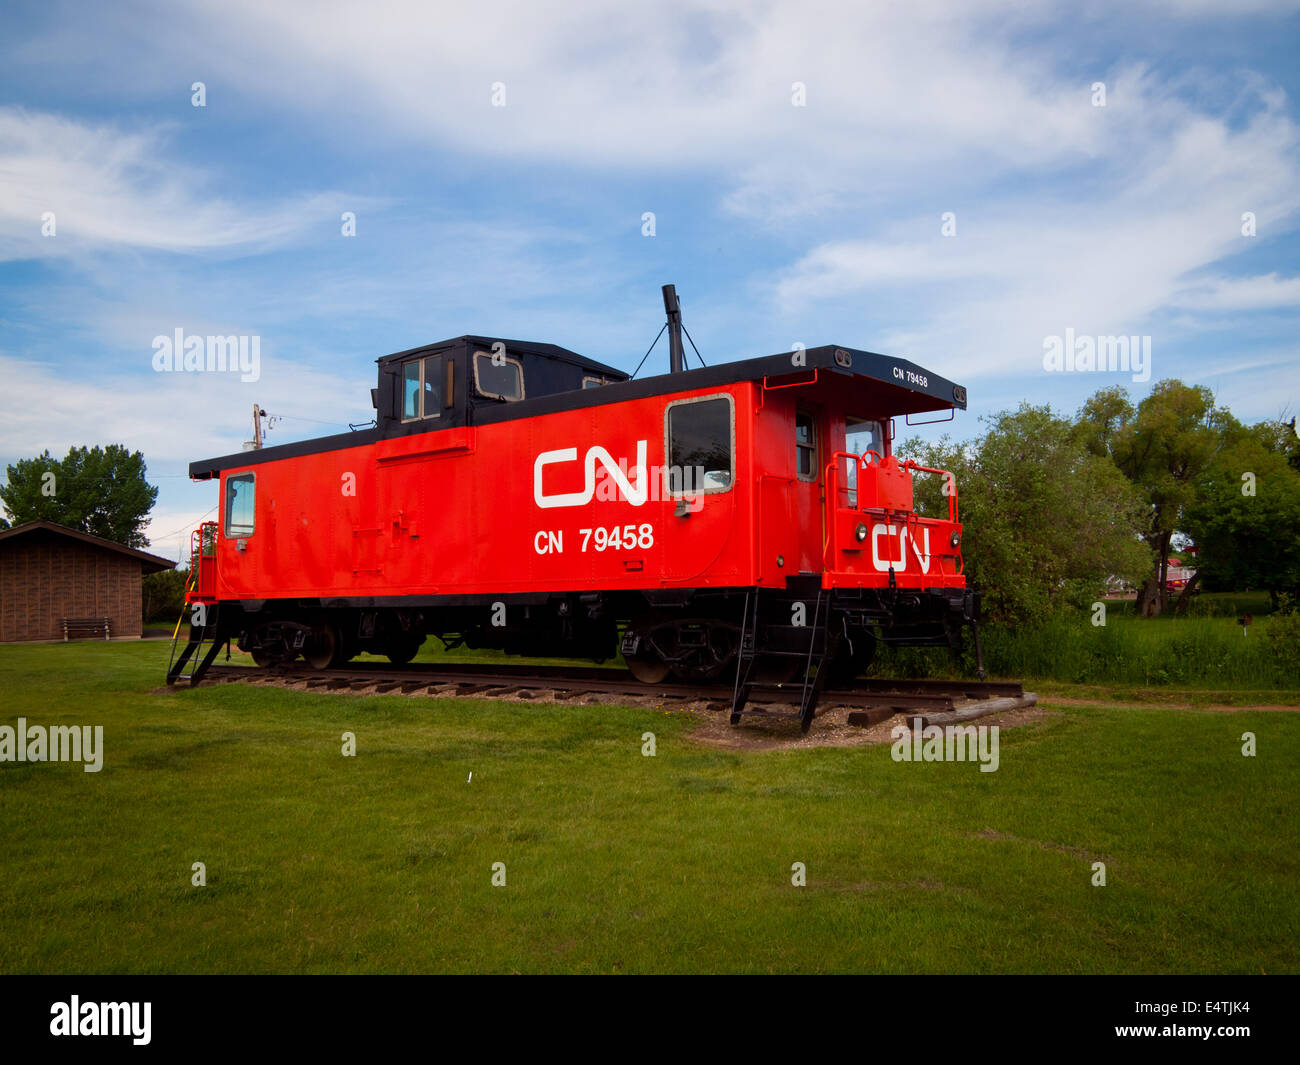 A view of a Canadian National Railway train caboose in Vegreville, Alberta, Canada. Stock Photo